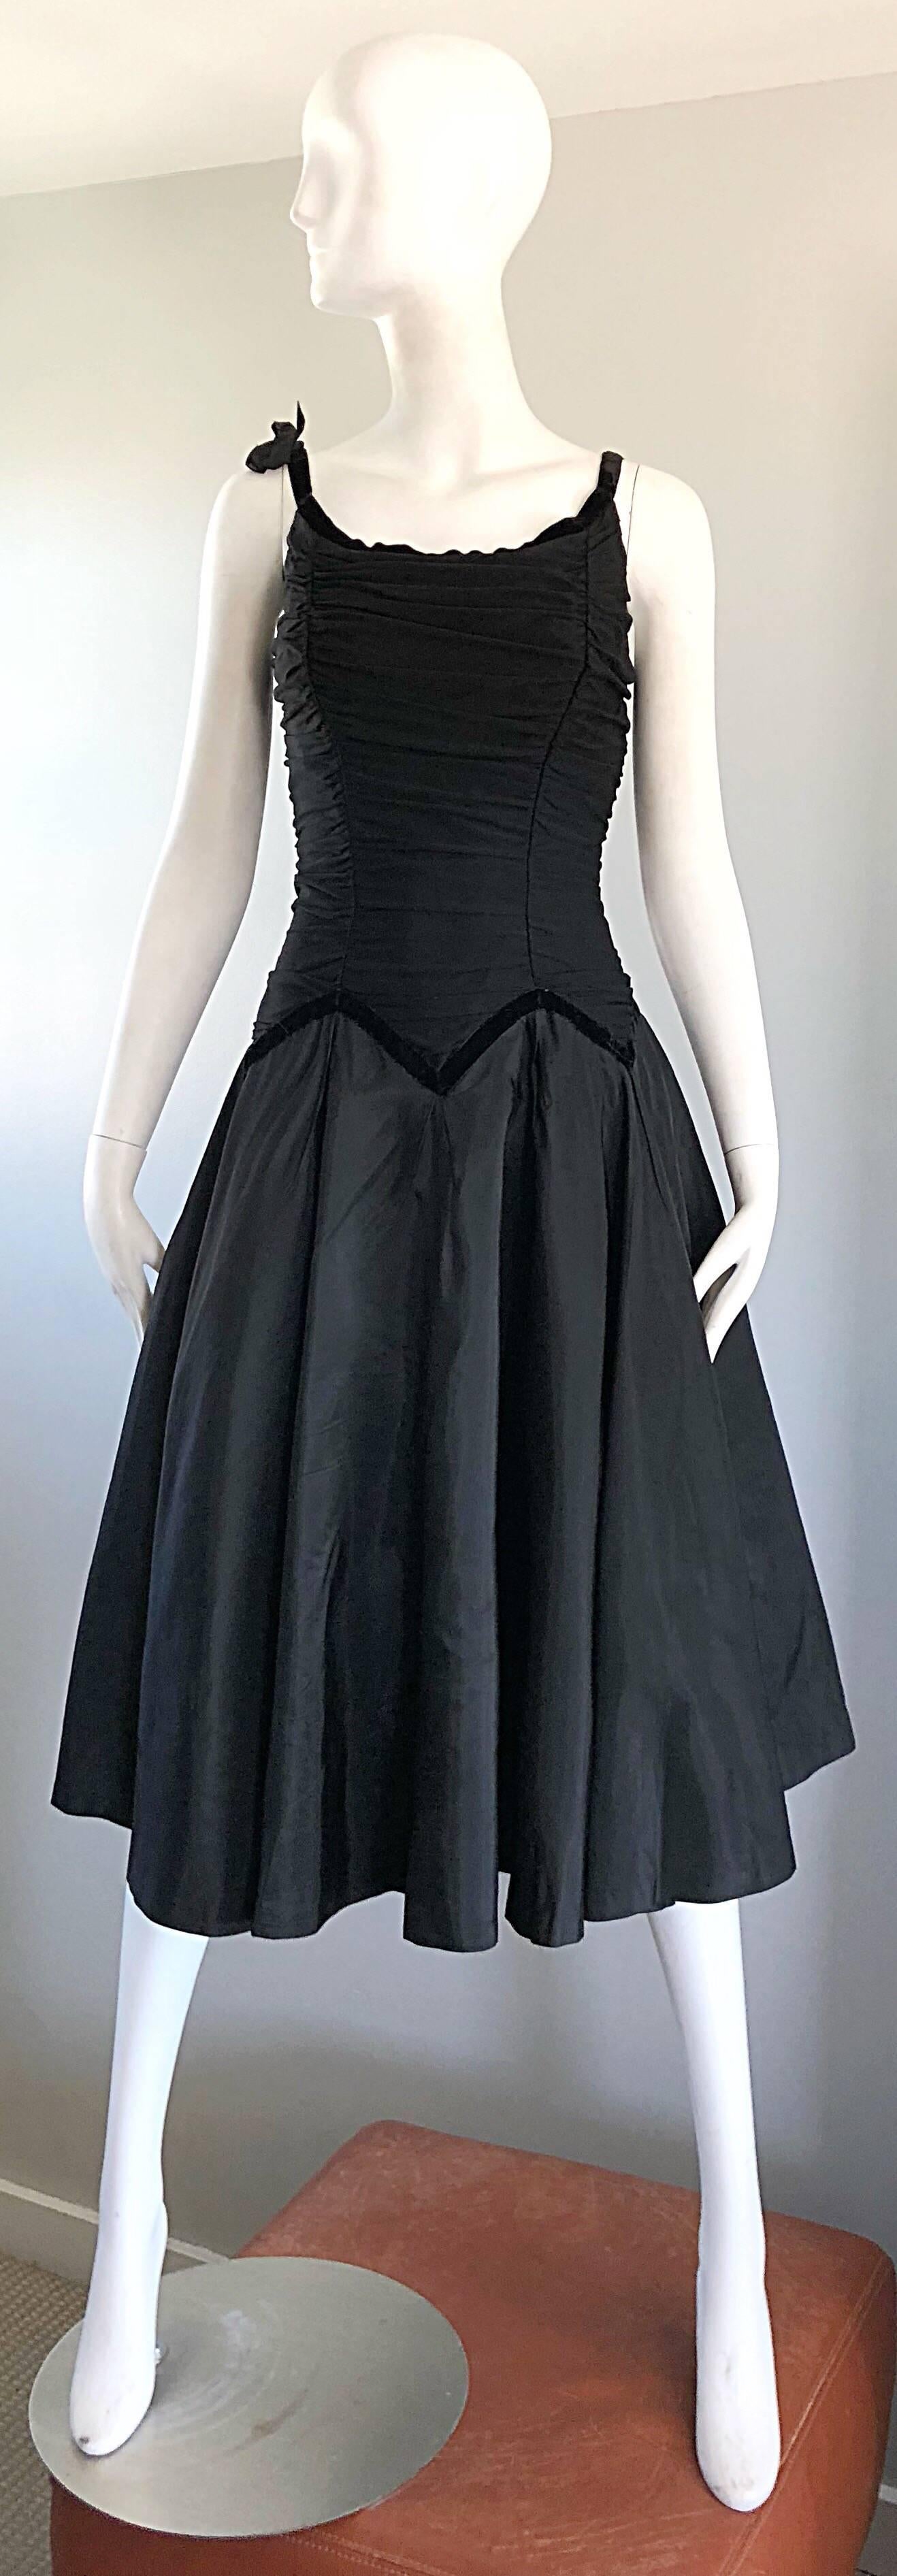 Beautiful 1950s black silk taffeta fit n' flare cocktail dress! Features a ruched silk mesh bodice with flattering black velvet zig zag accents along the waist. Black velvet trip along the neck and sleeves, with a chic little bow on the right